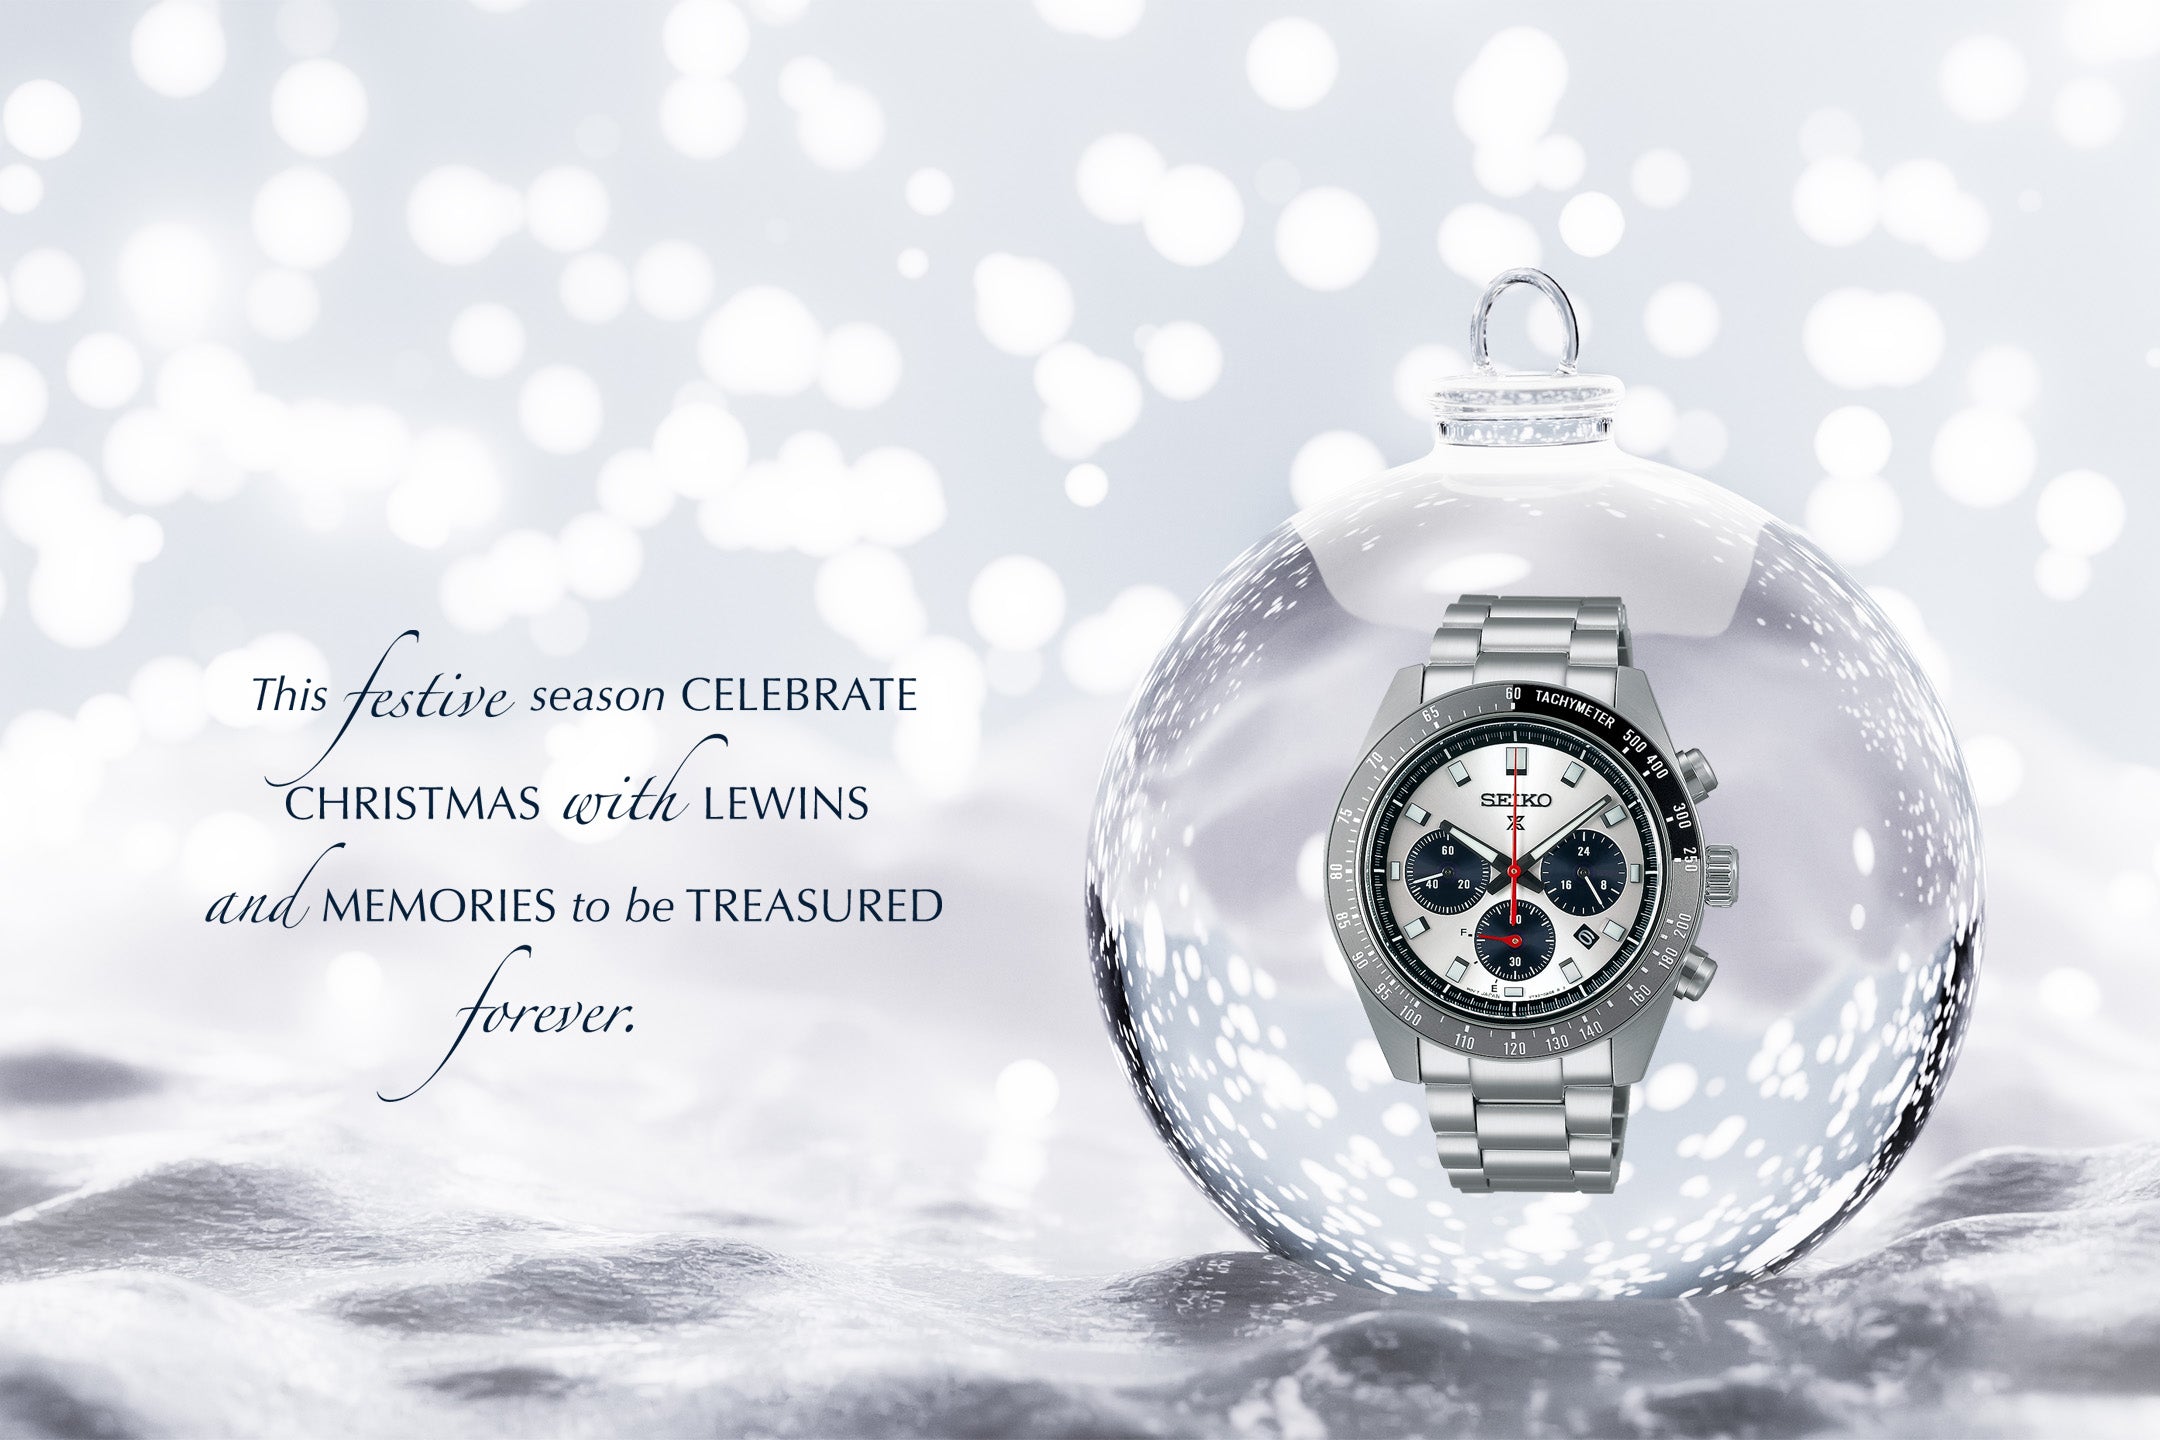 Seiko Prospex Speedtimer “Go Large” Solar Chronograph, White Dial with Stainless Steel Bracelet in Bauble on Snow Background